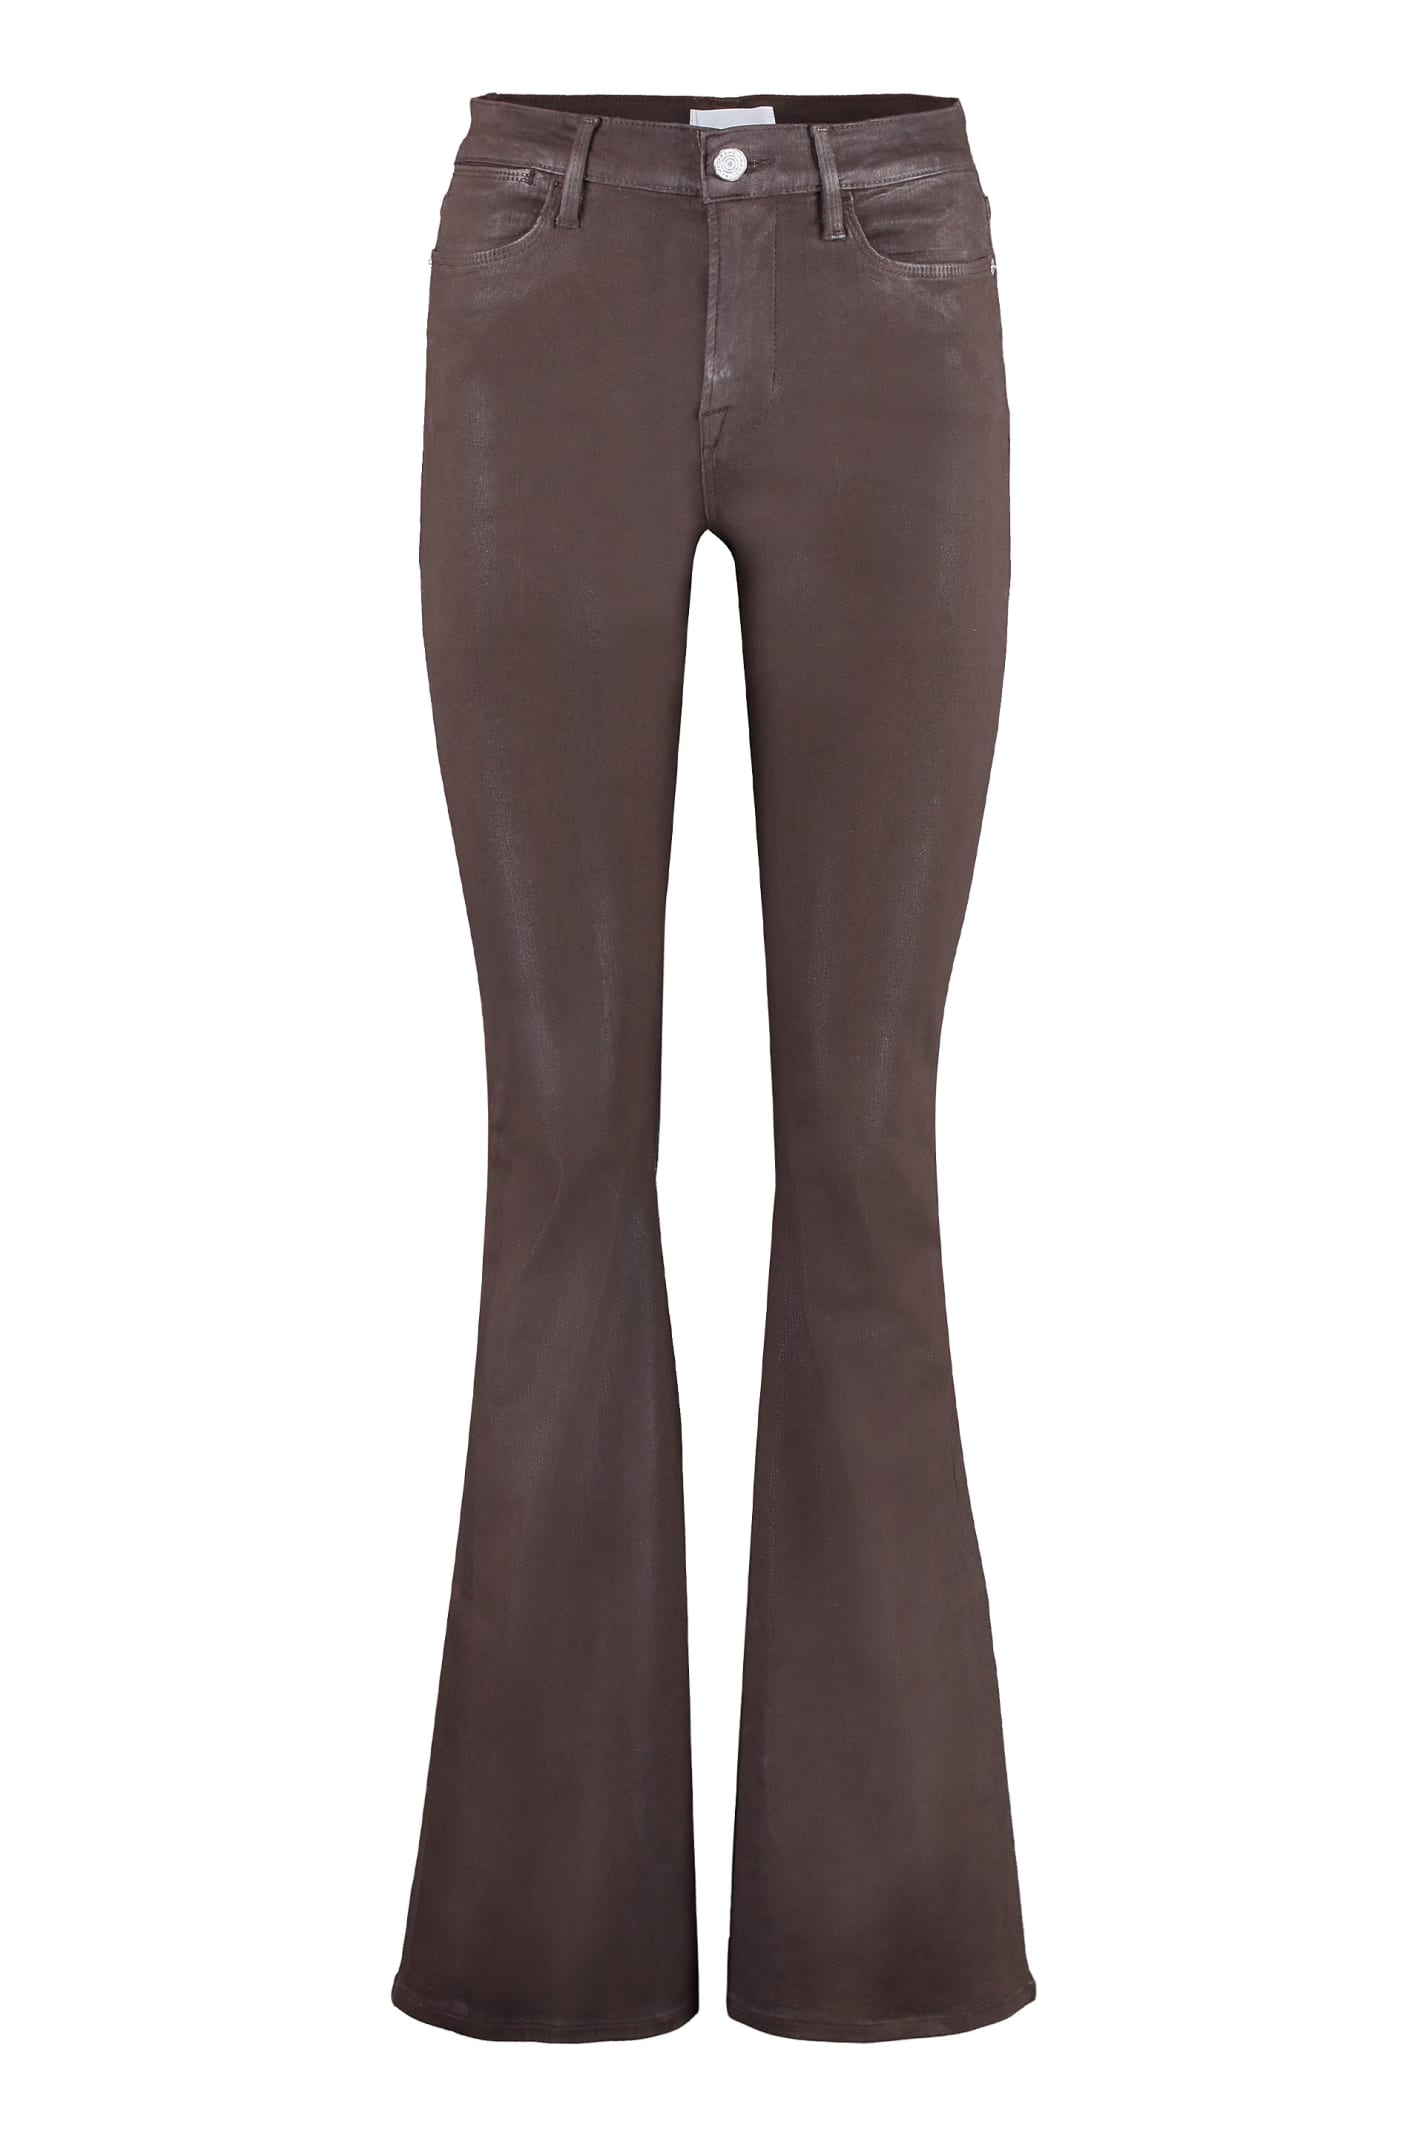 Frame Le Hight Flare Flared Trousers